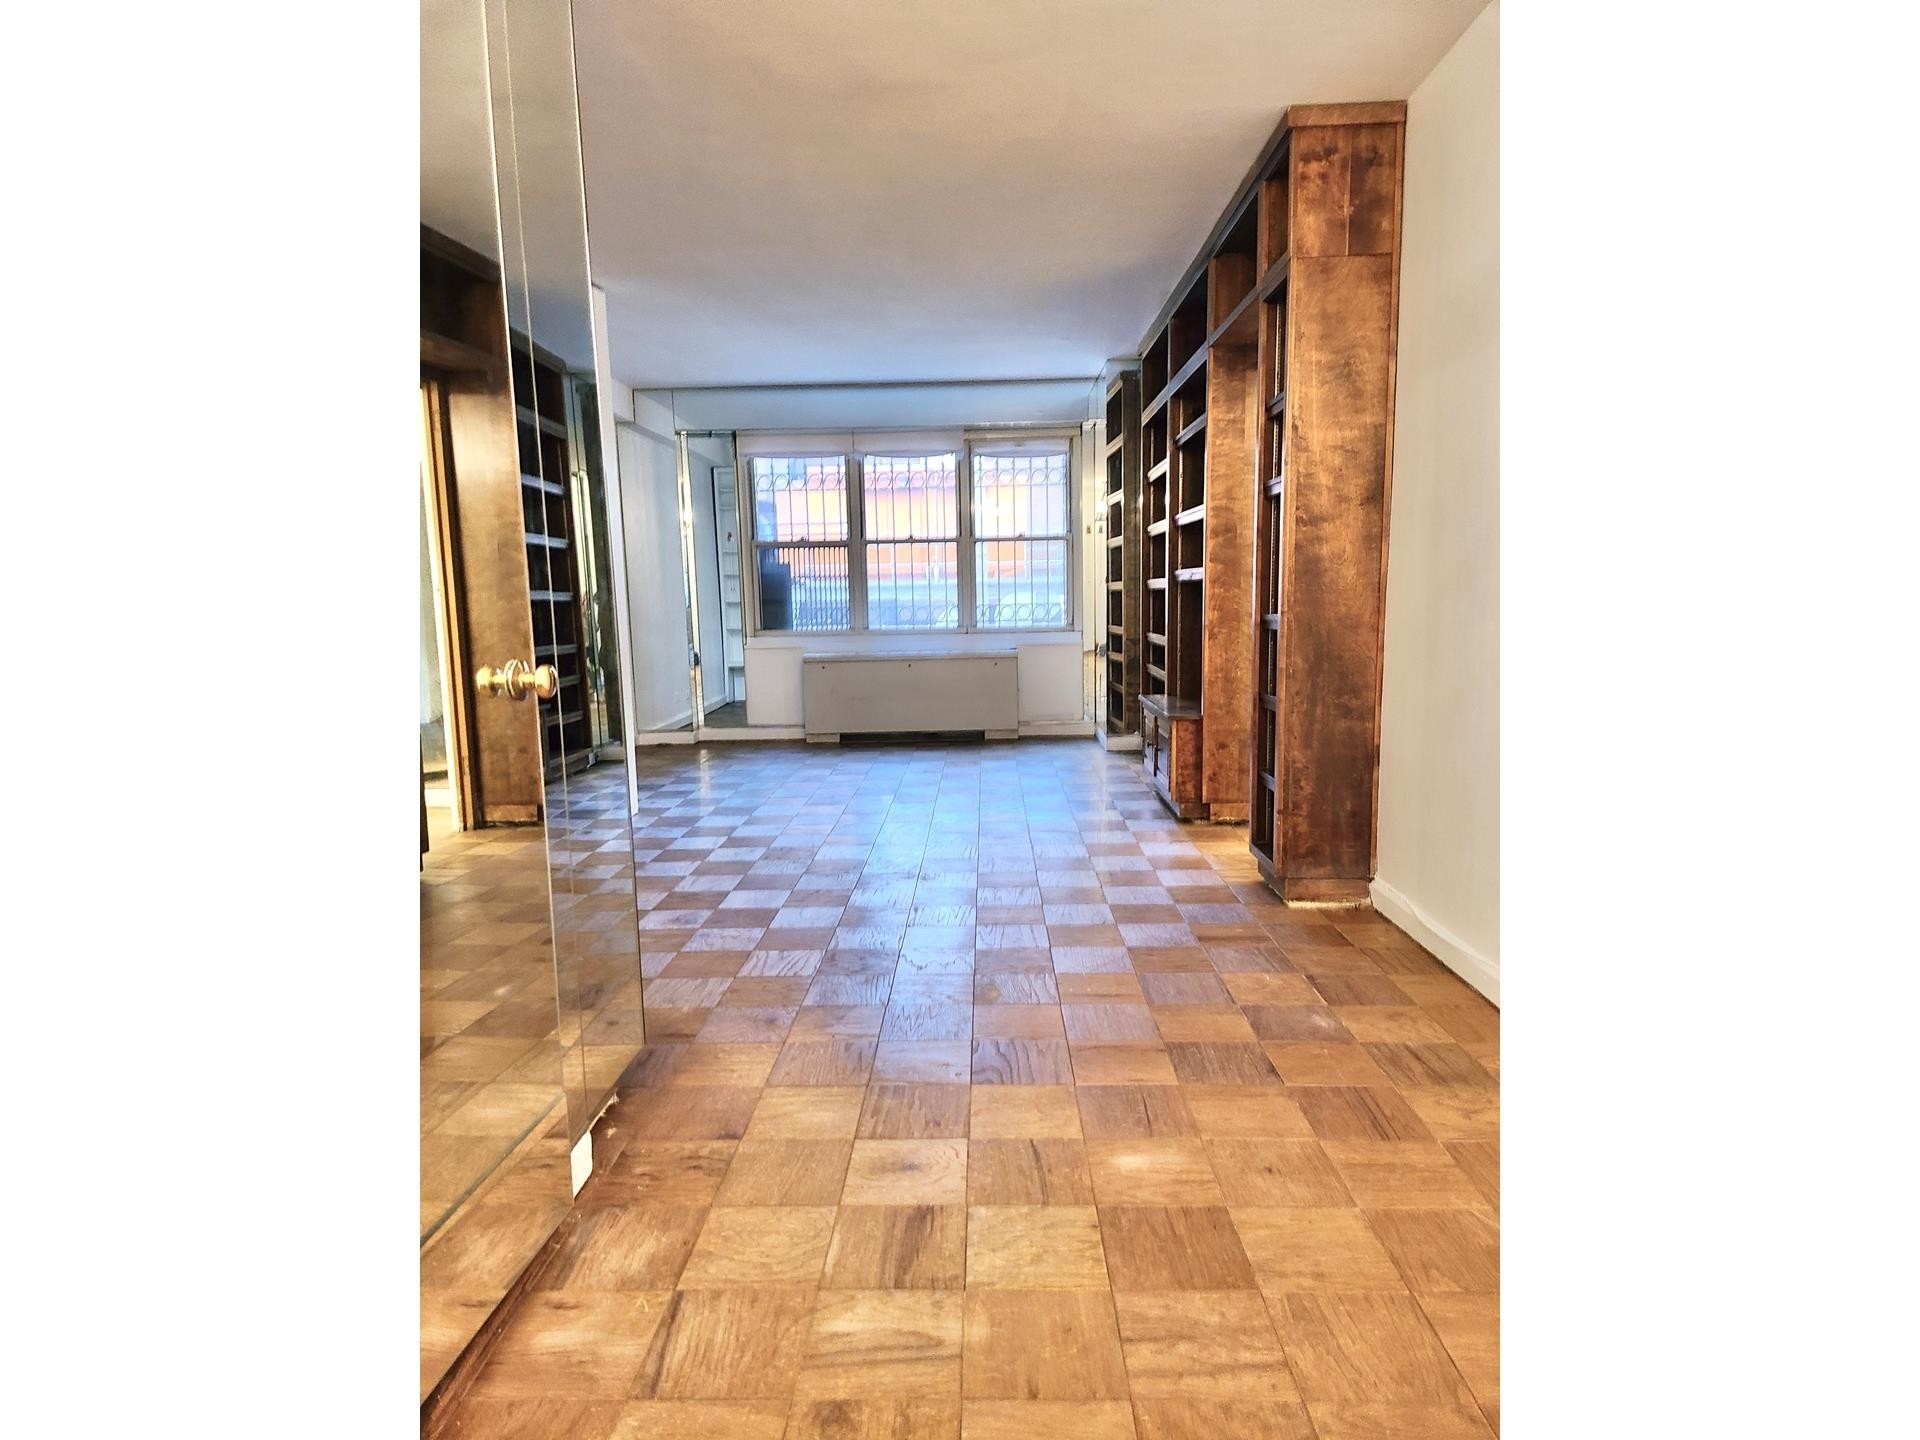 Co-op Properties for Sale at 205 E 63RD ST, H3 Lenox Hill, New York, New York 10065